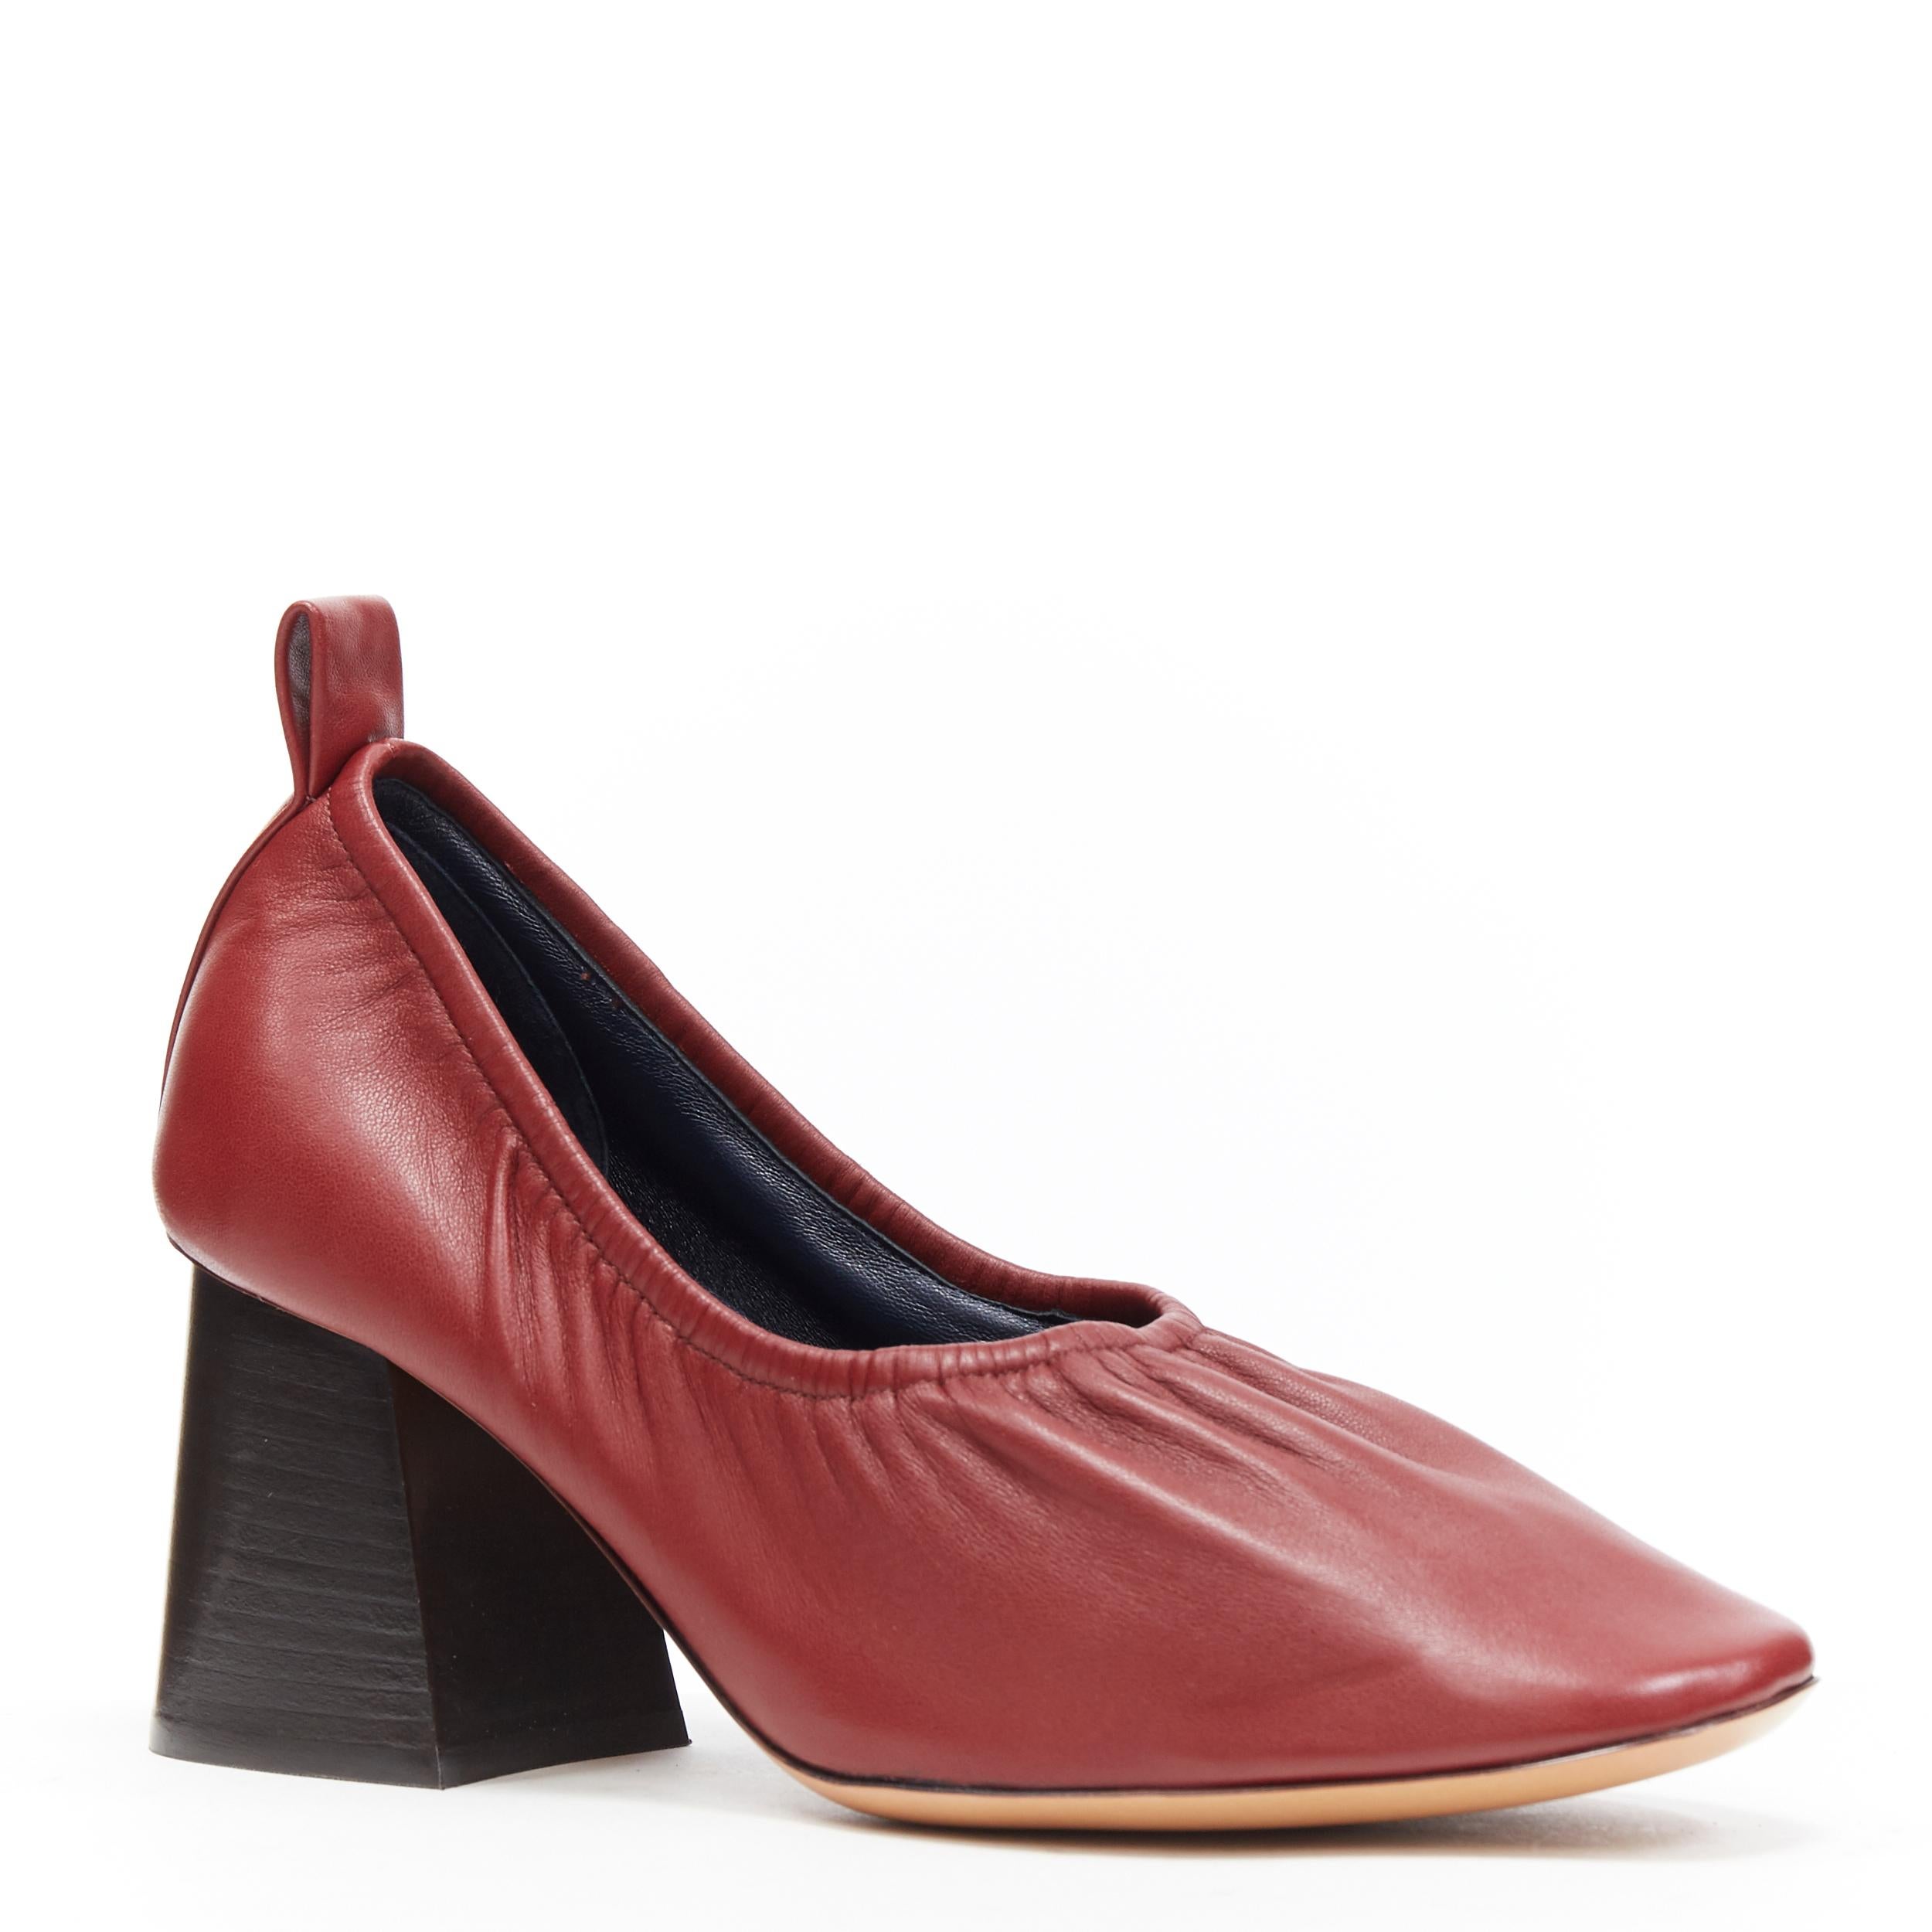 new CELINE  PHILO burgundy red leather round toe ballerina chunky heel EU38
Brand: Celine
Designer: Phoebe Philo
Model Name / Style: Ballerina Pump
Material: Leather
Color: Burgundy
Pattern: Solid
Lining material: Leather
Extra Detail: High (3-3.9